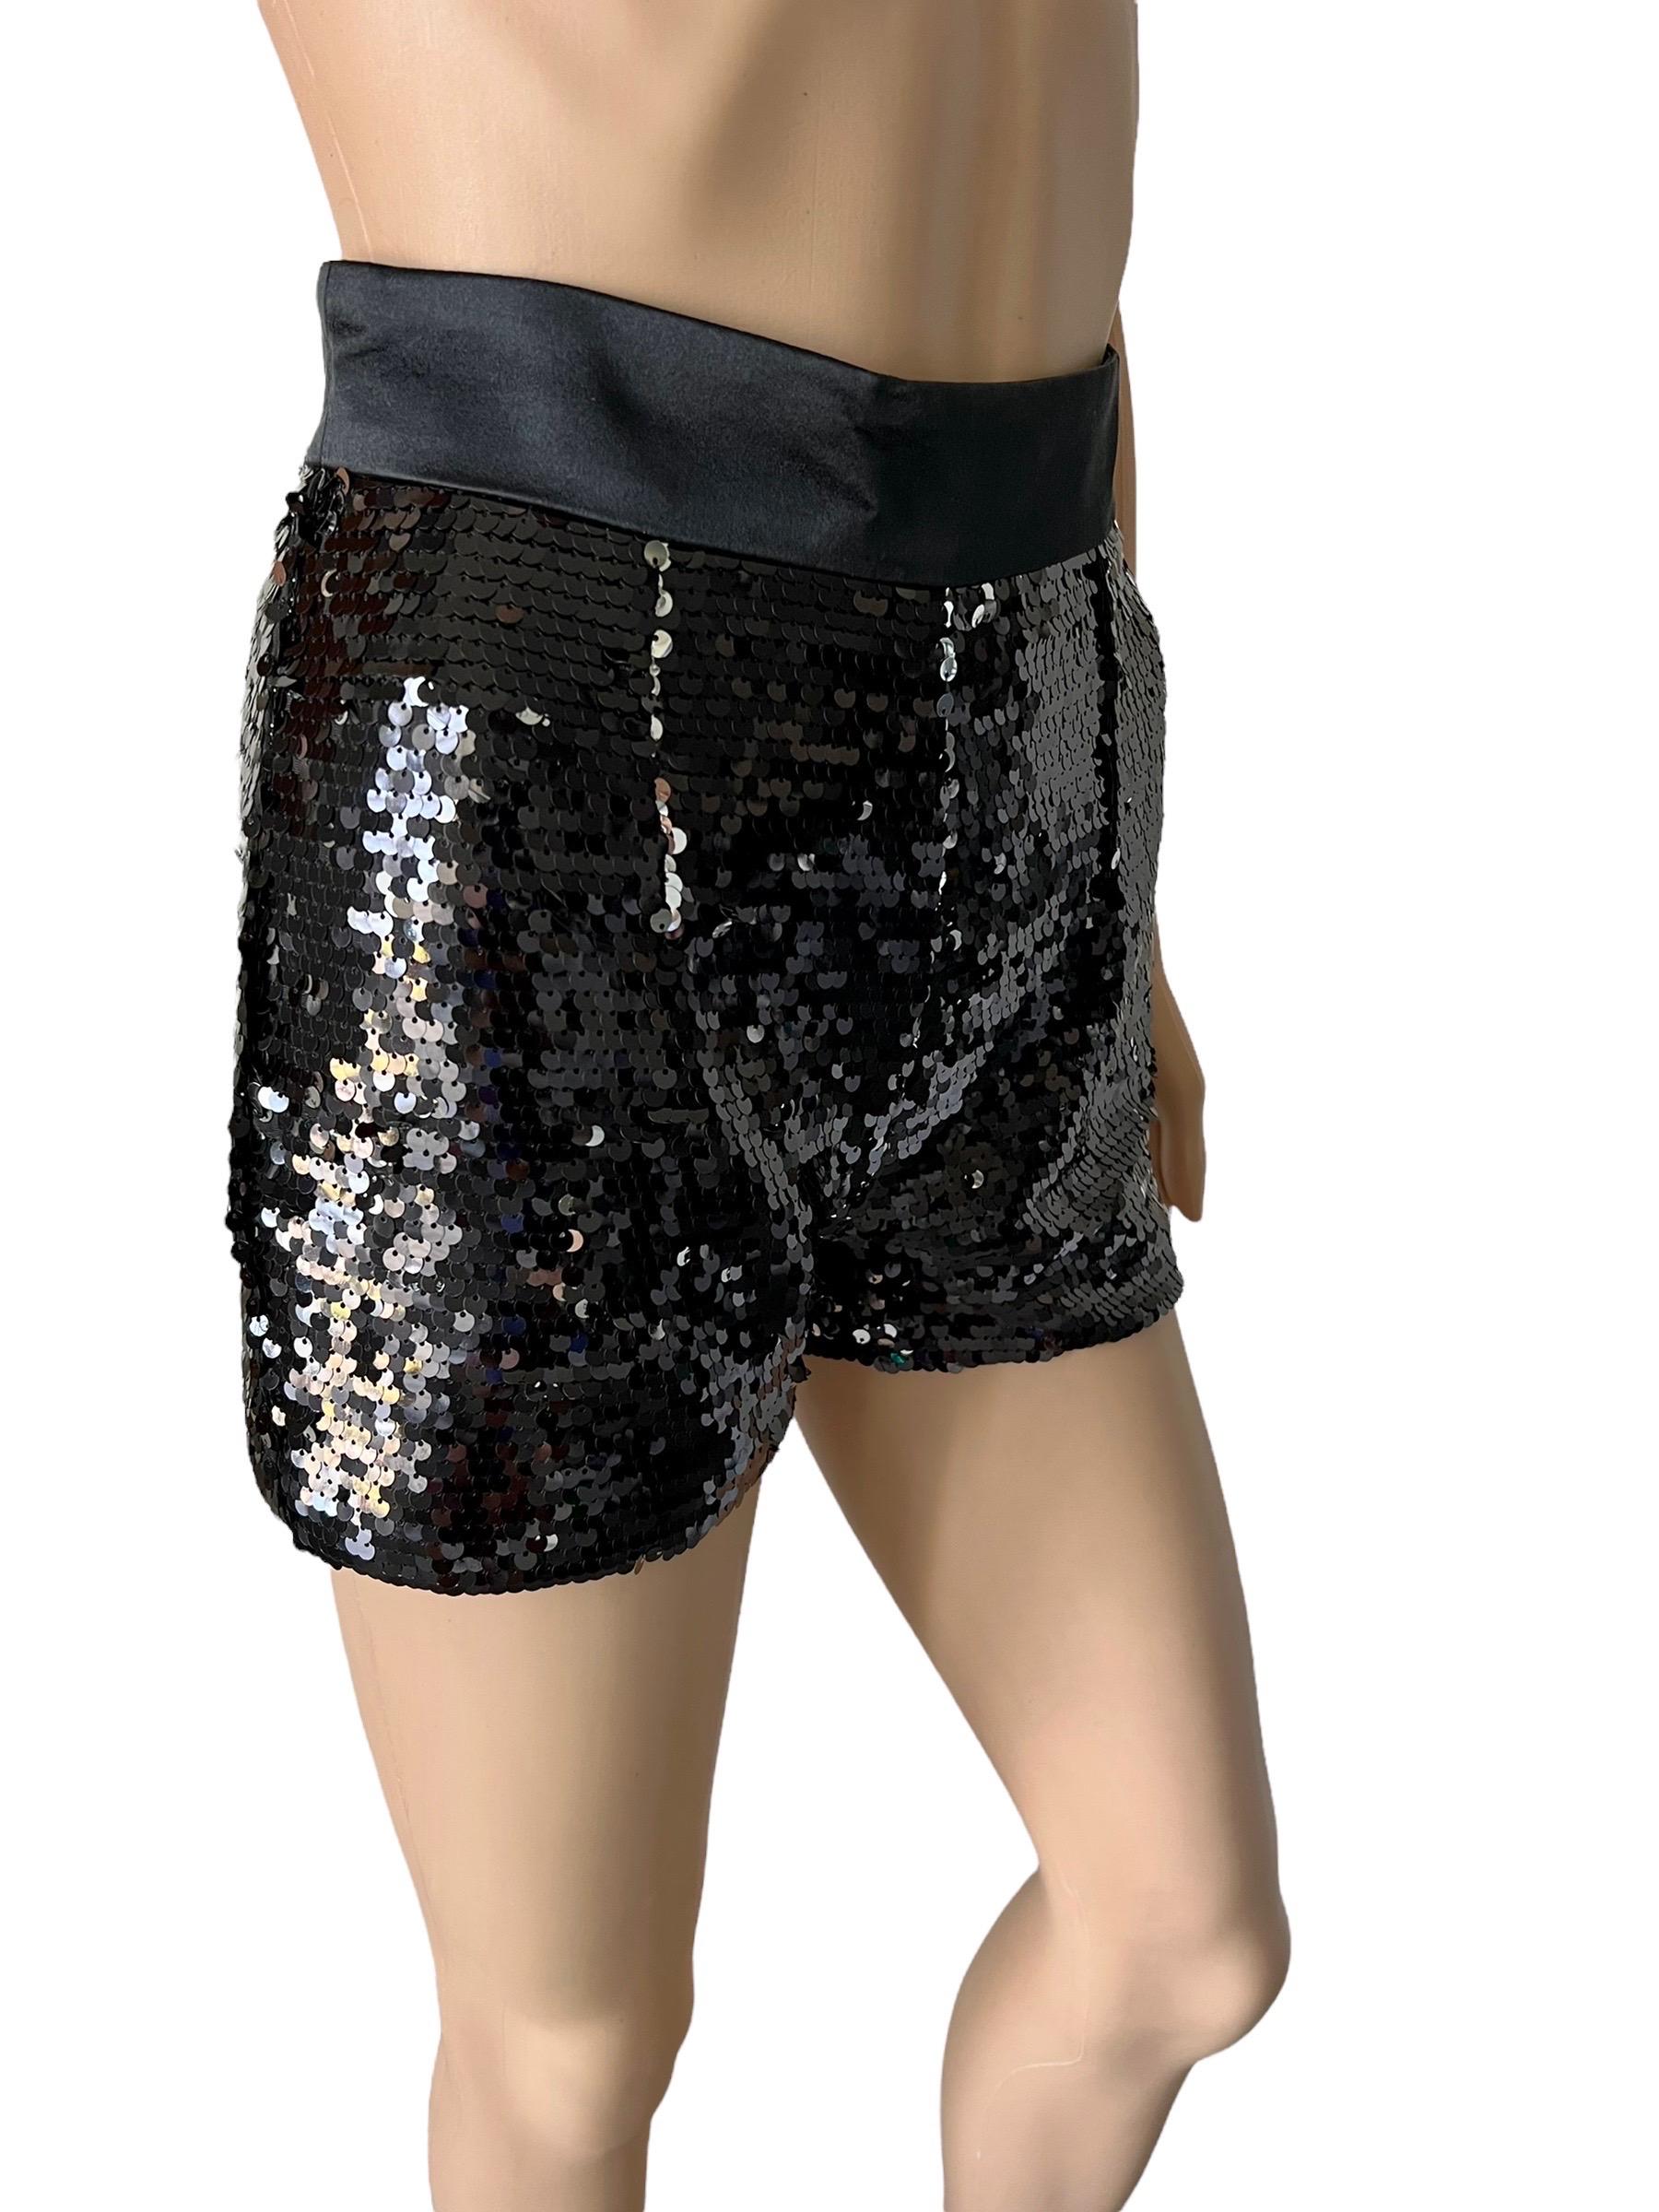 Dolce & Gabbana F/W 2011 Unworn Sequin Embellished Black Hot Pants Mini Shorts IT 36

Condition: New with Tags




